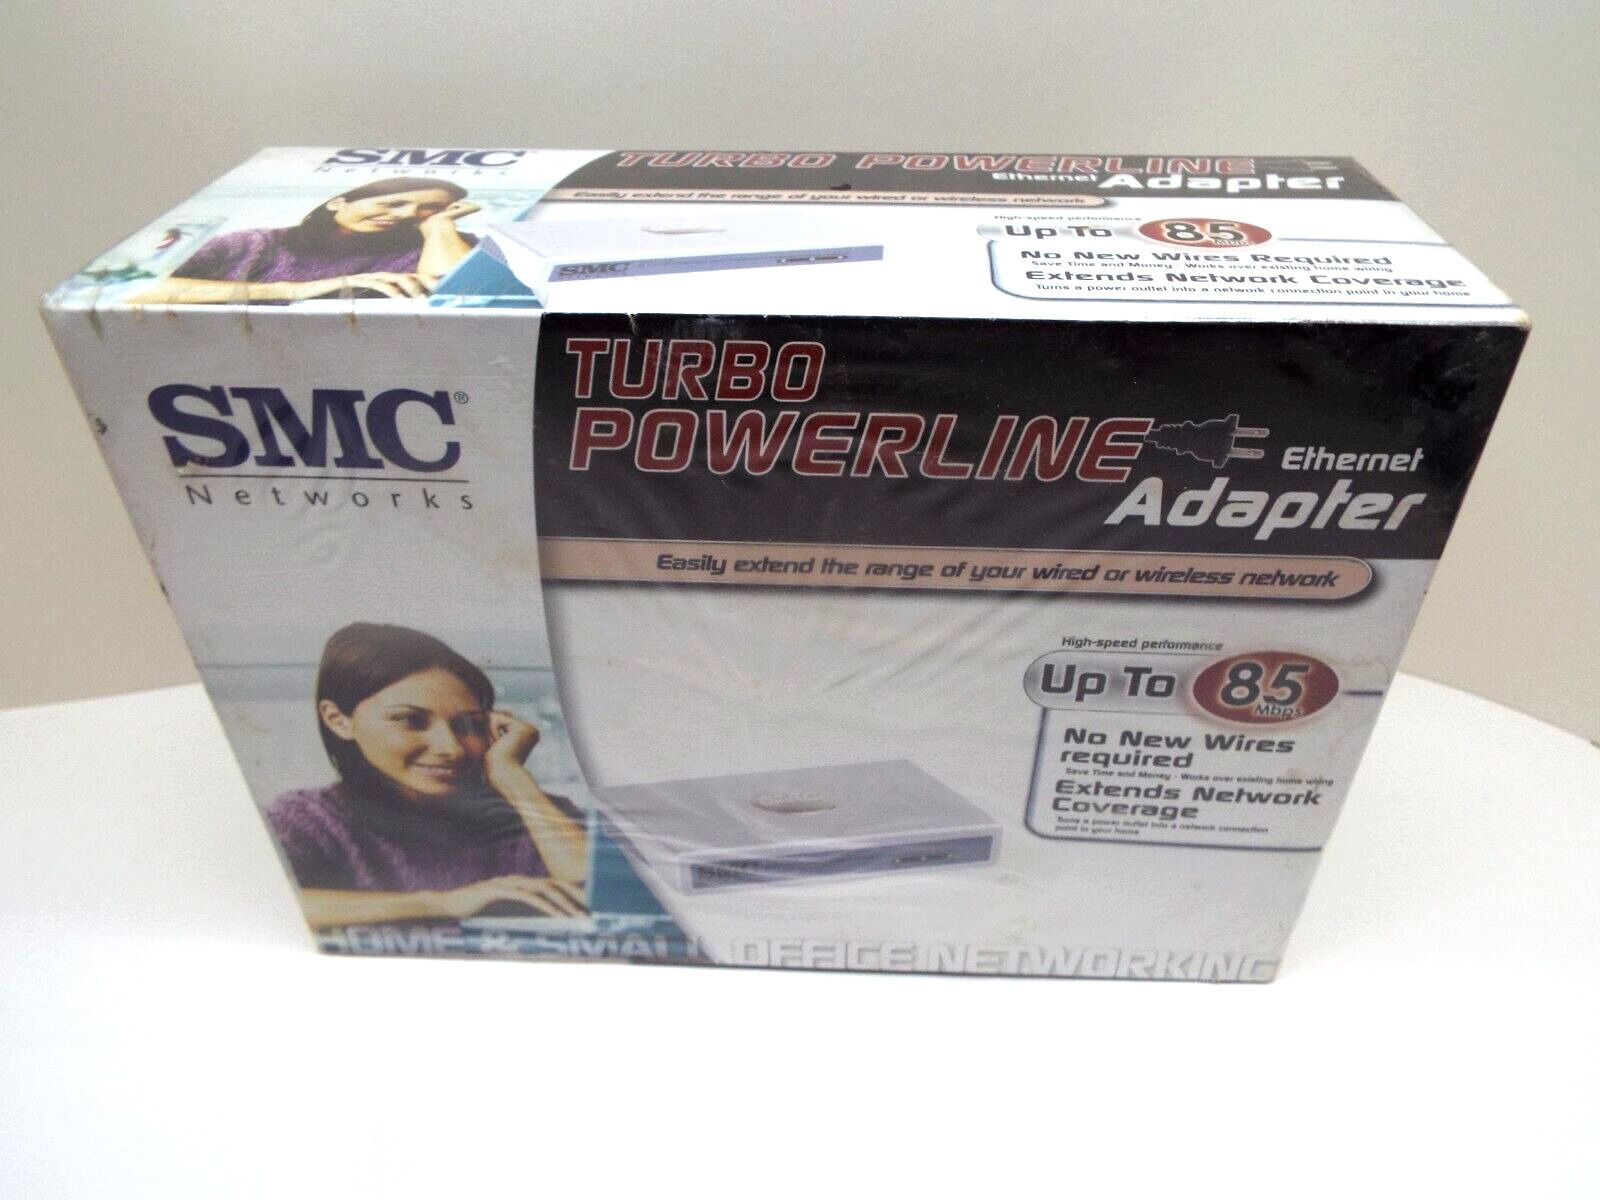 SMC NETWORKS TURBO POWER LINE ETHERNET ADAPTER...EXTENDS NETWORK...NEW IN BOX